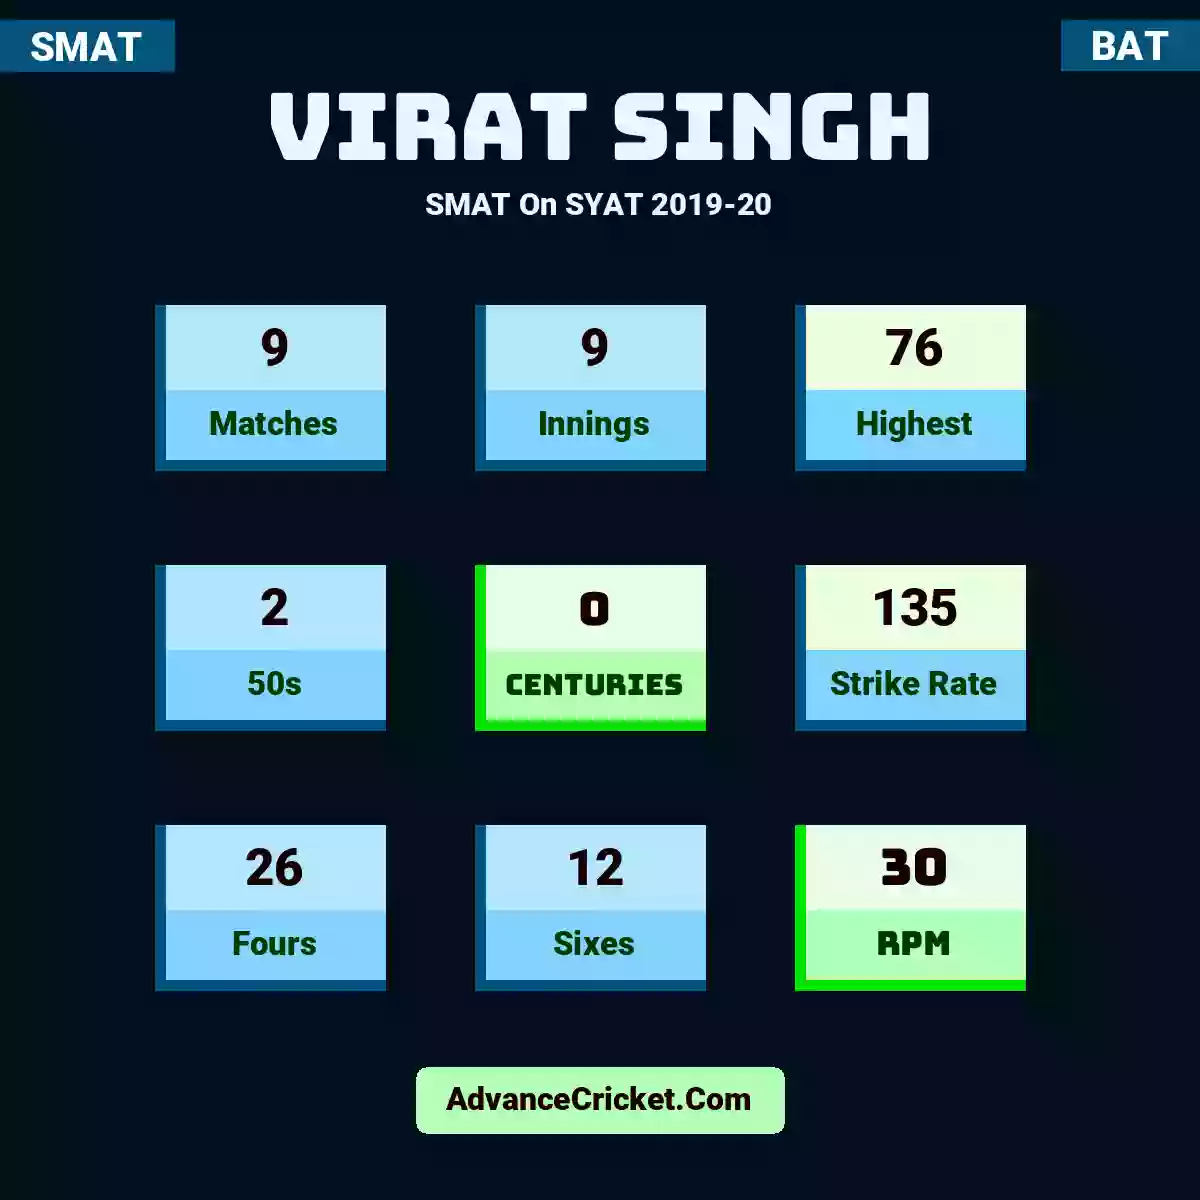 Virat Singh SMAT  On SYAT 2019-20, Virat Singh played 9 matches, scored 76 runs as highest, 2 half-centuries, and 0 centuries, with a strike rate of 135. V.Singh hit 26 fours and 12 sixes, with an RPM of 30.